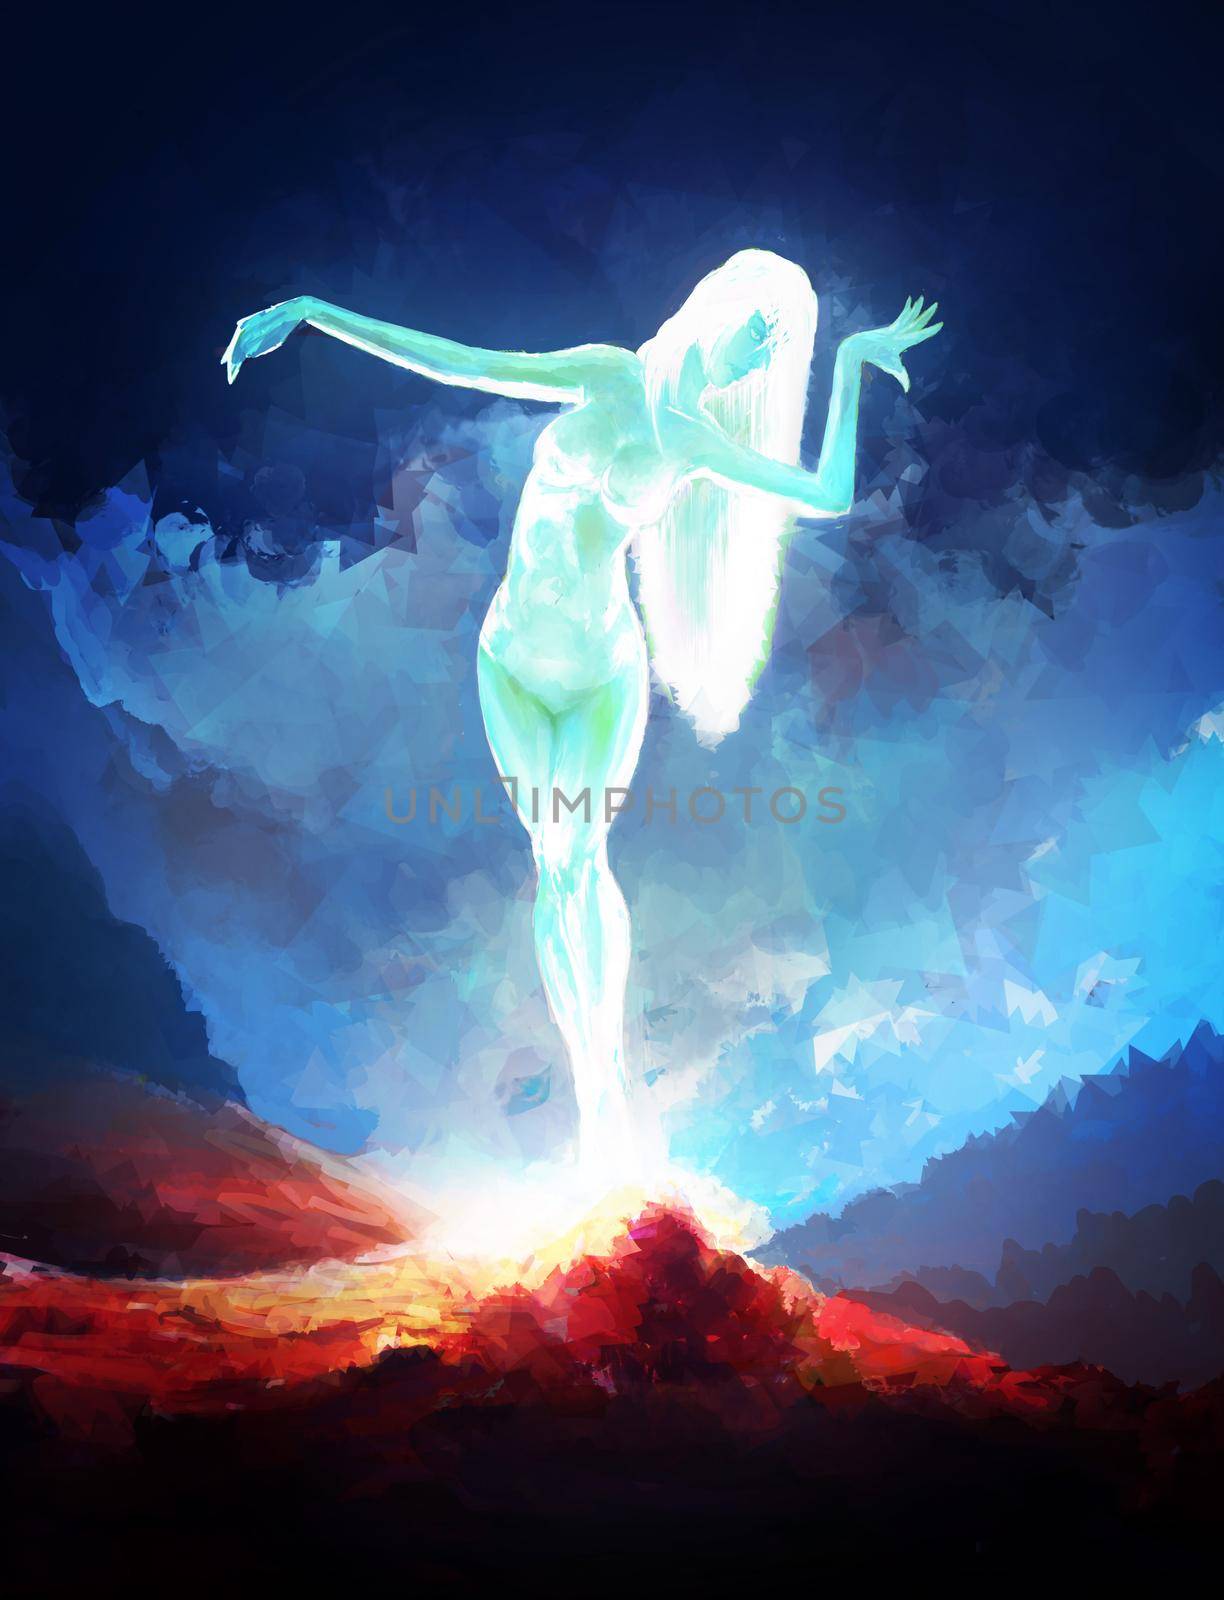 Diamond Emerald Girl on a scenic backdrop of mountains and  the blue night sky. Glowing Nude Woman in elegant Pose.